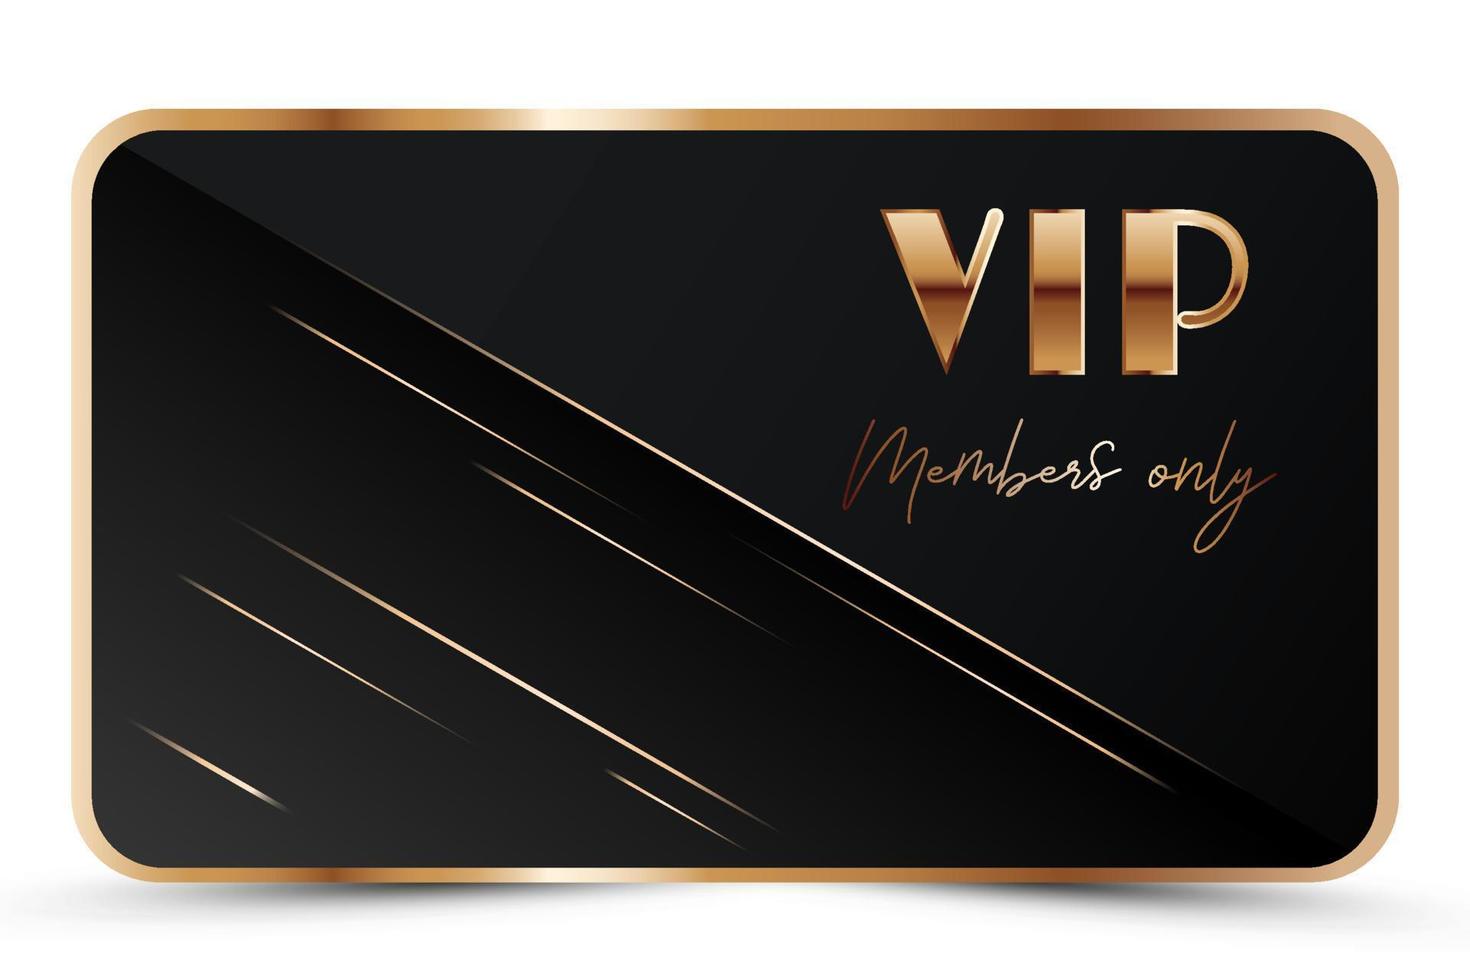 Black elegant vip card template. Modern business card for members only with golden 3d text, crown. Luxury abstract invitation. Vector illustration for loyalty, bonus card, gift certificate